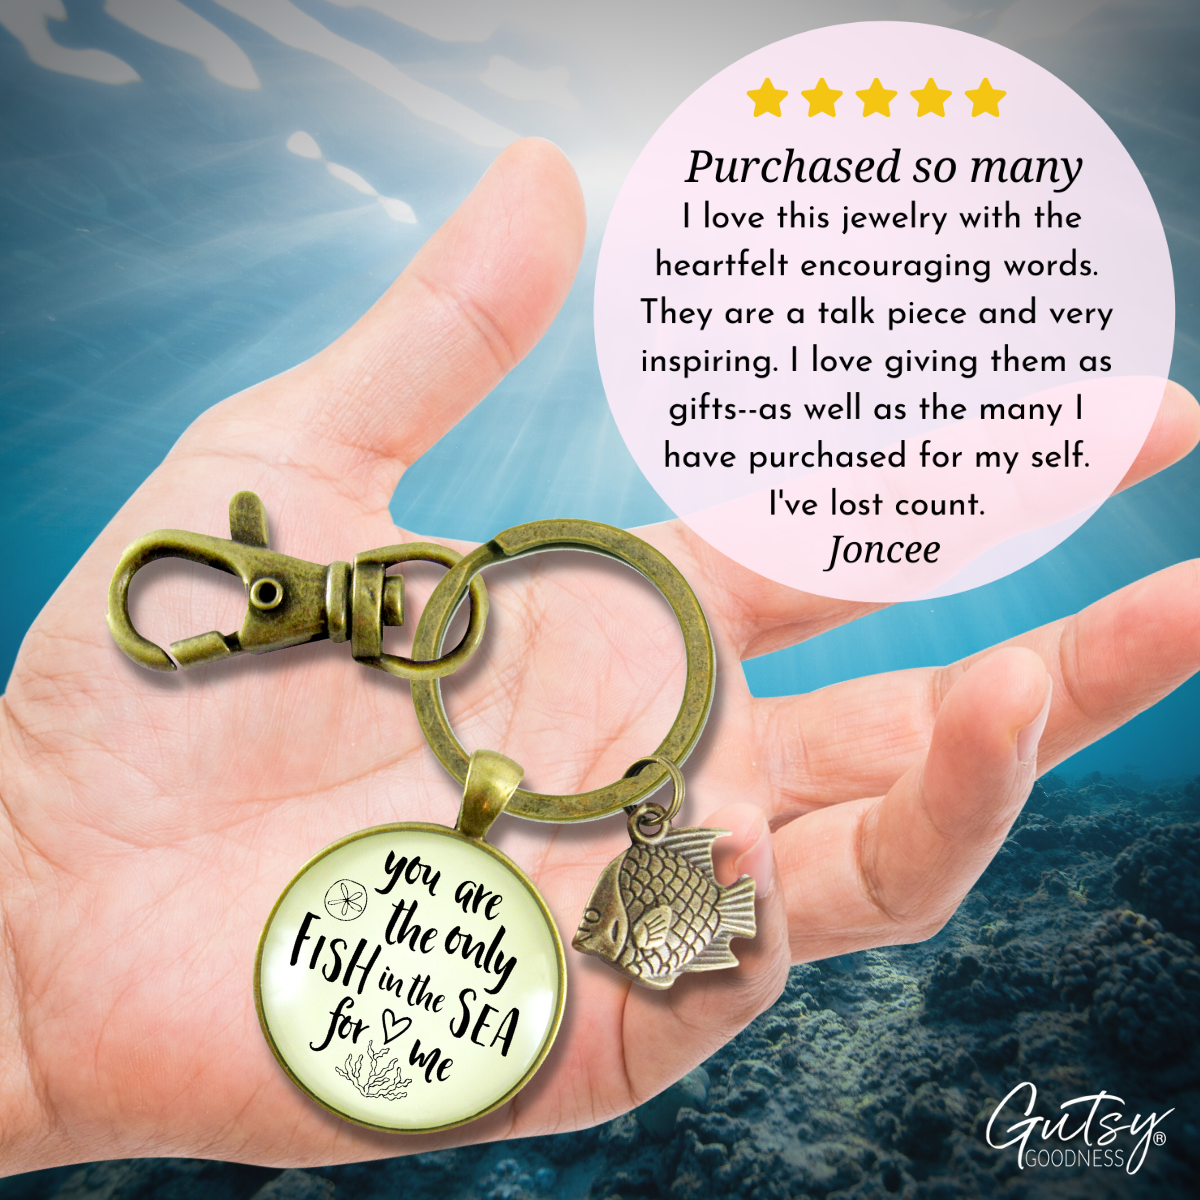 Gutsy Goodness Fishing Couples Keychain for Men You Are The Only Fish in The Sea Love Quote Ocean Gift